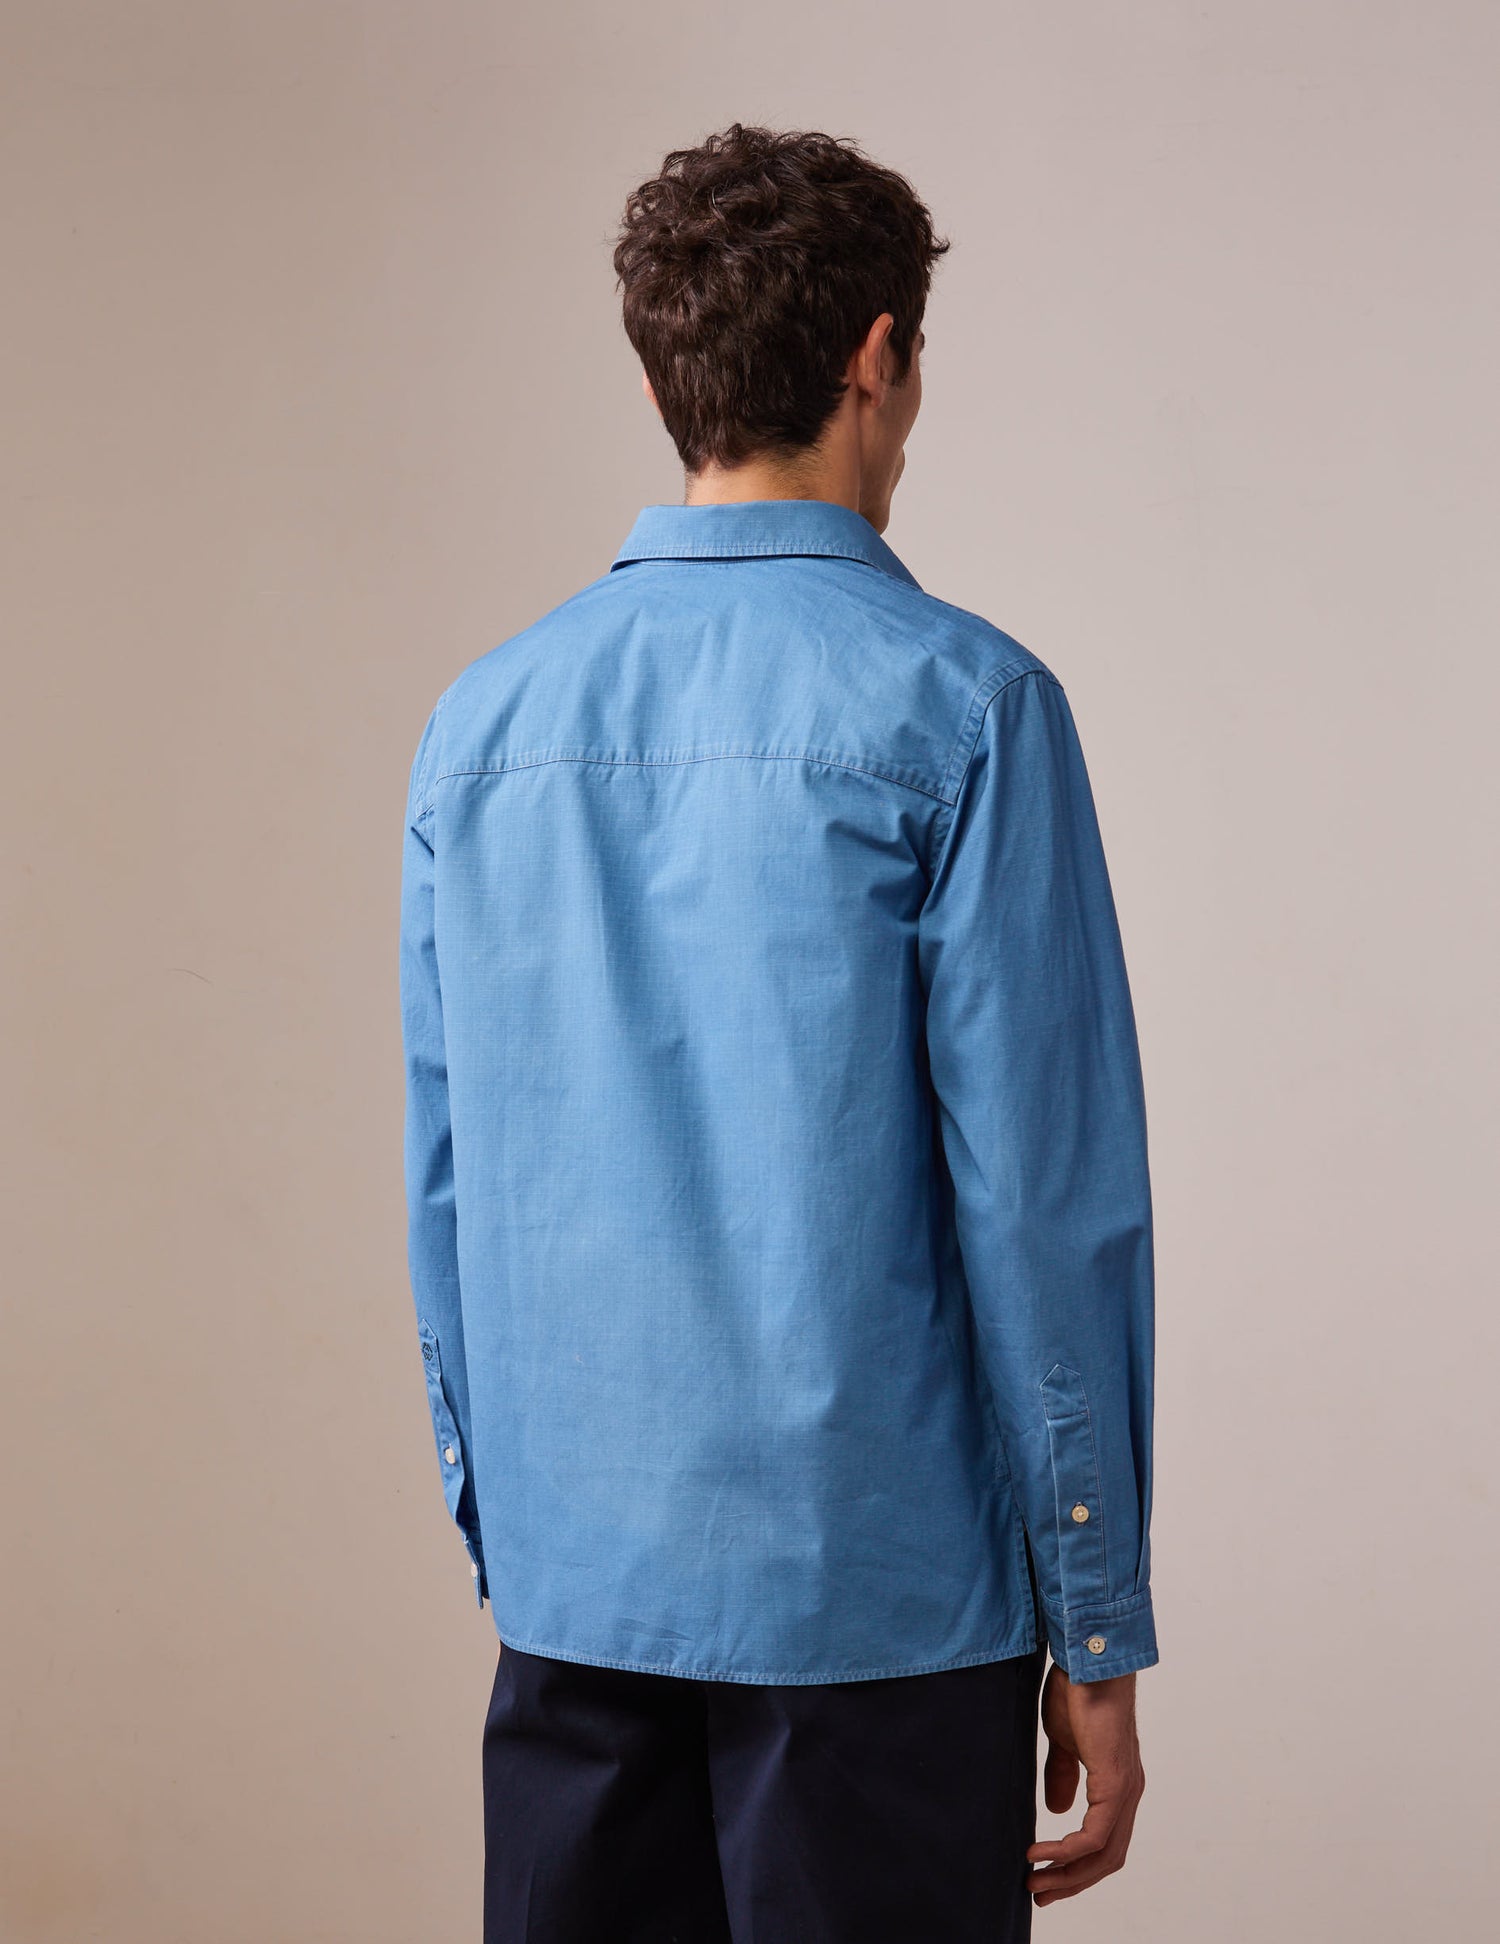 Florian shirt in light blue ripstop - Ripstop - French Collar#3